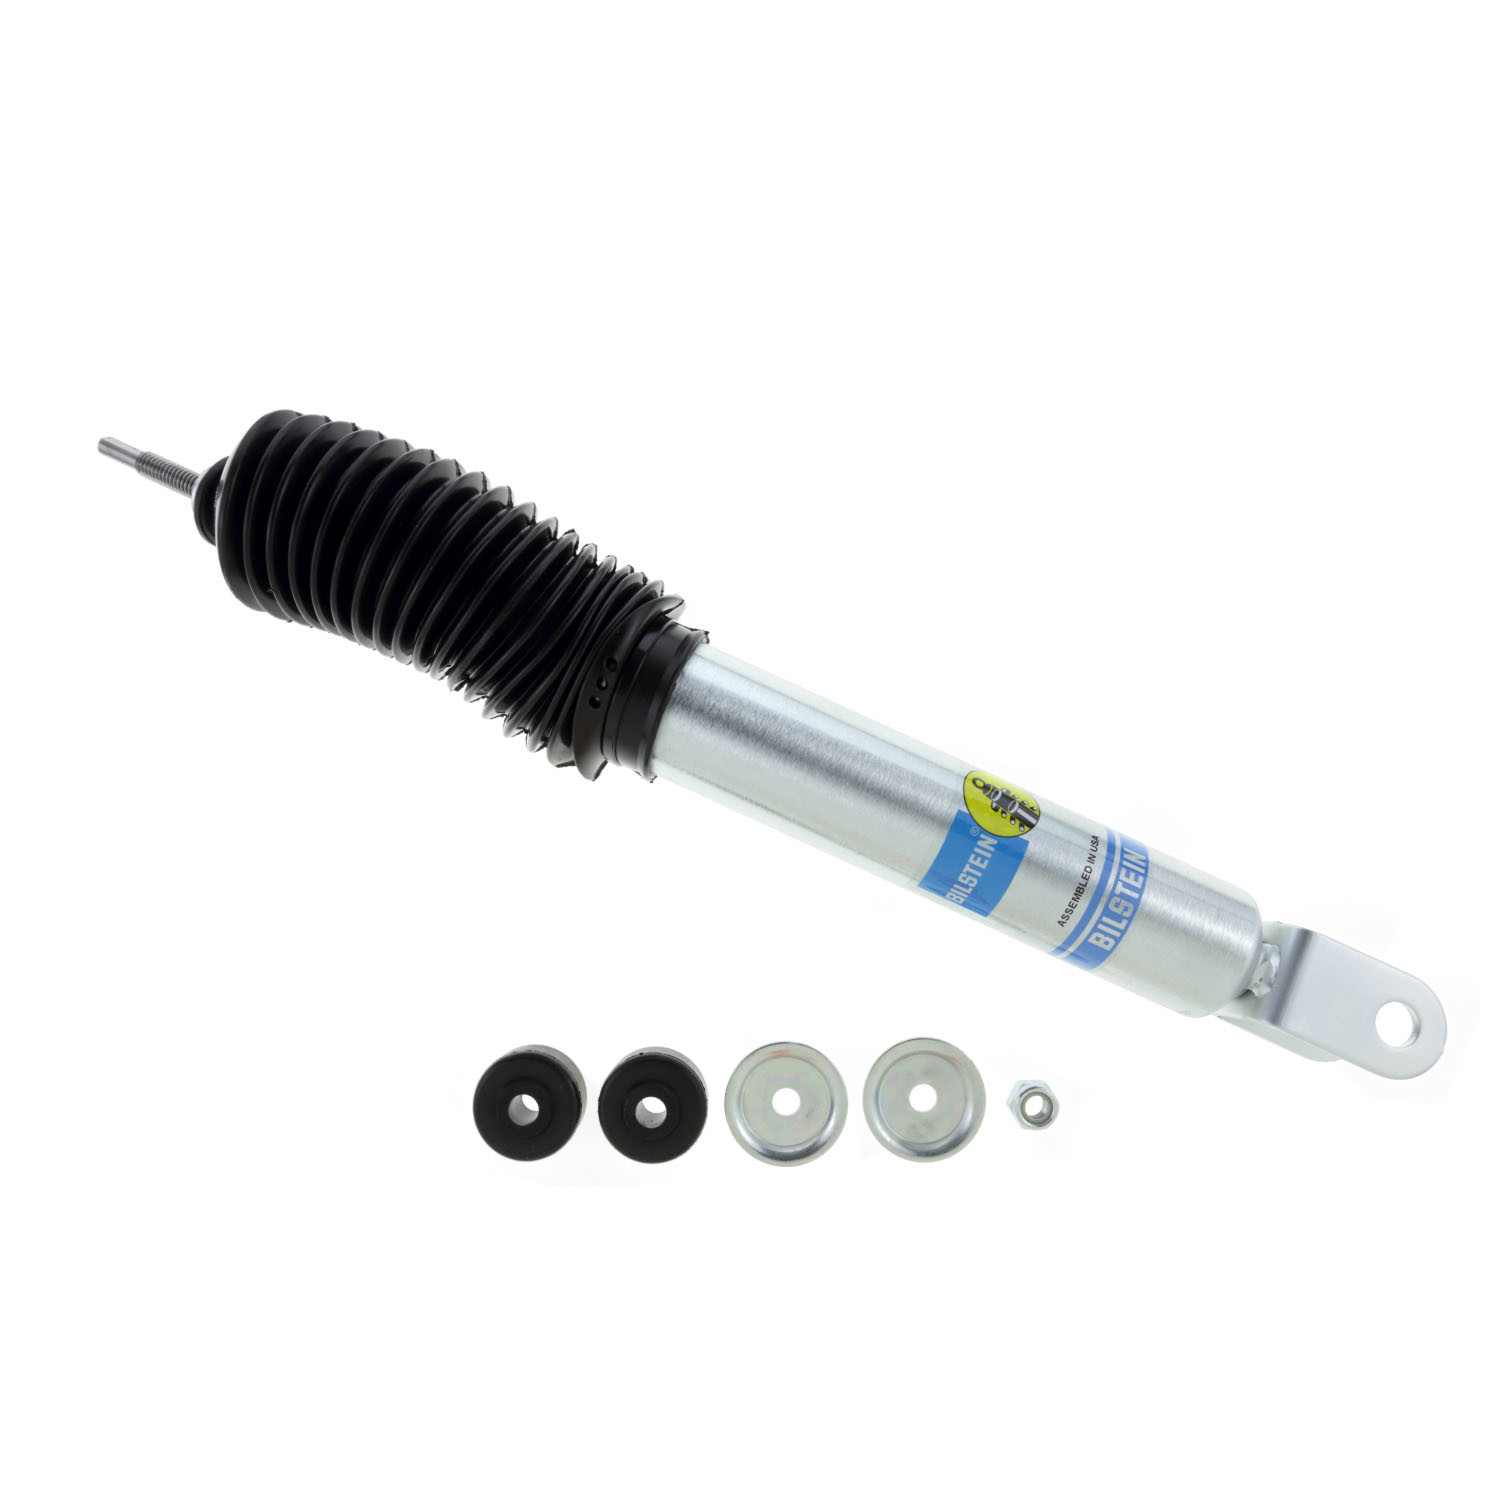 BILSTEIN - B8 5100 Shock Absorber (With ABS Brakes, Front) - BIL 24-186643